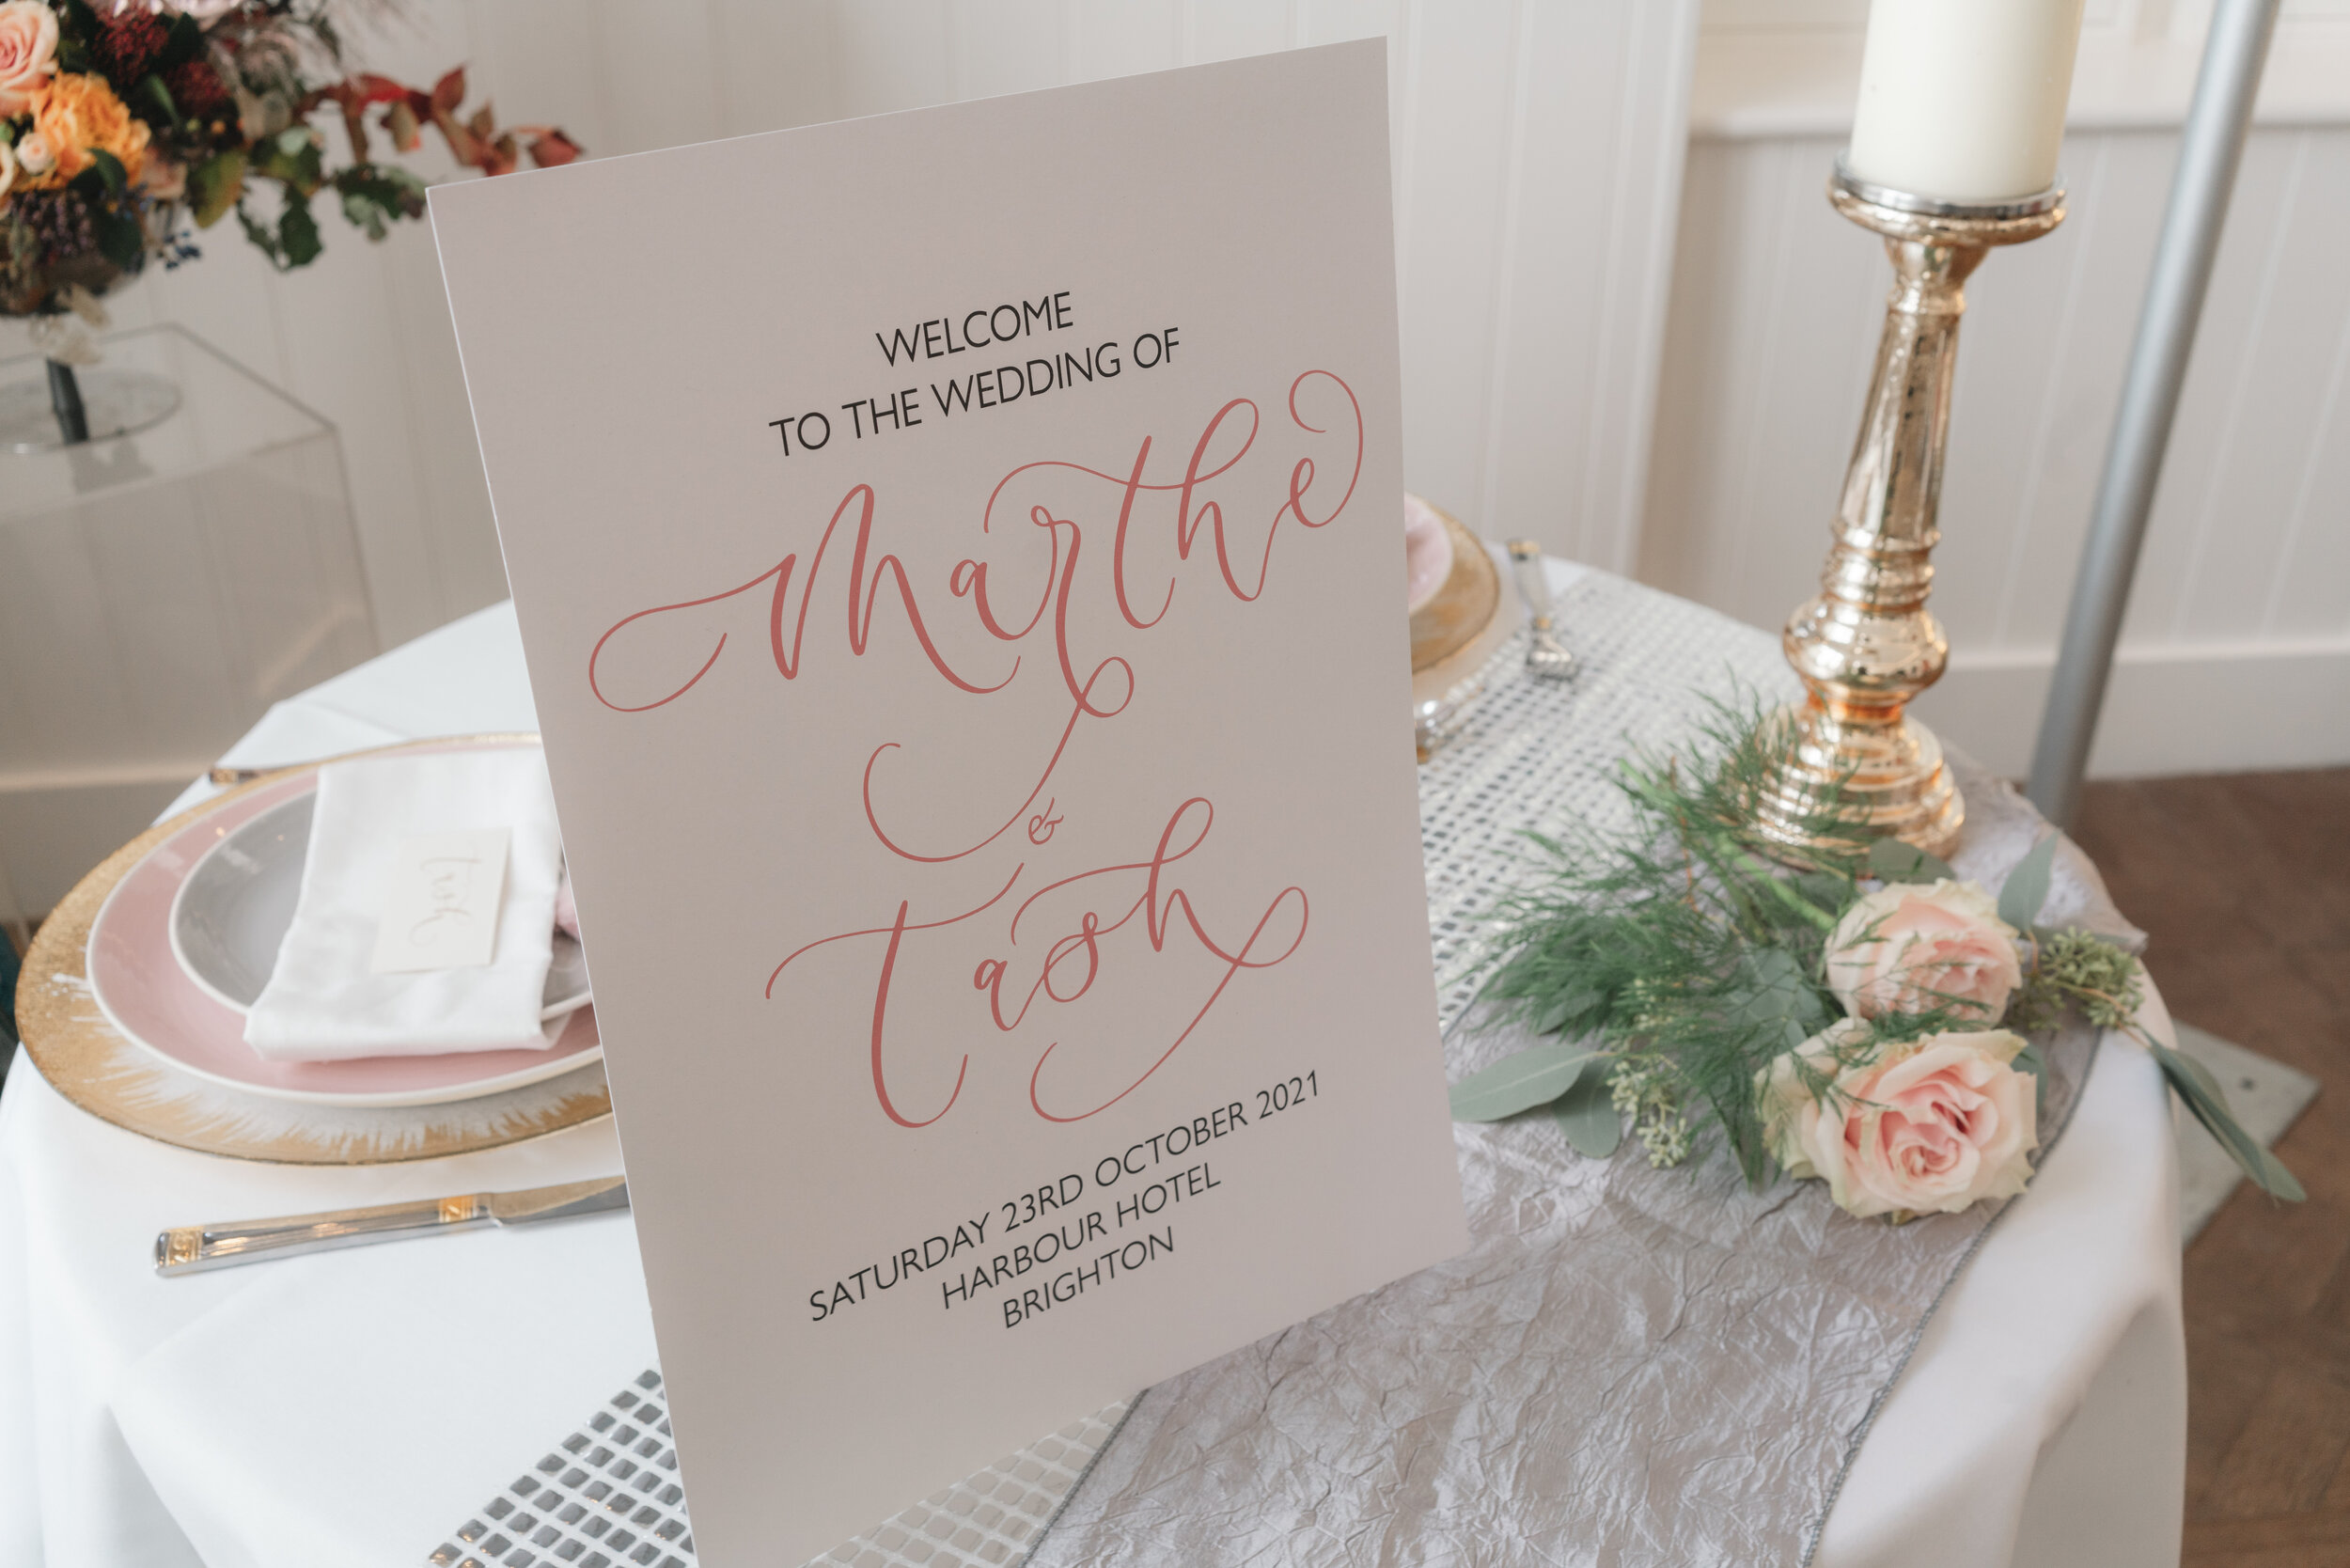 Welcome to the wedding calligraphy sign with pink calligraphy - welcome sign 3.jpg